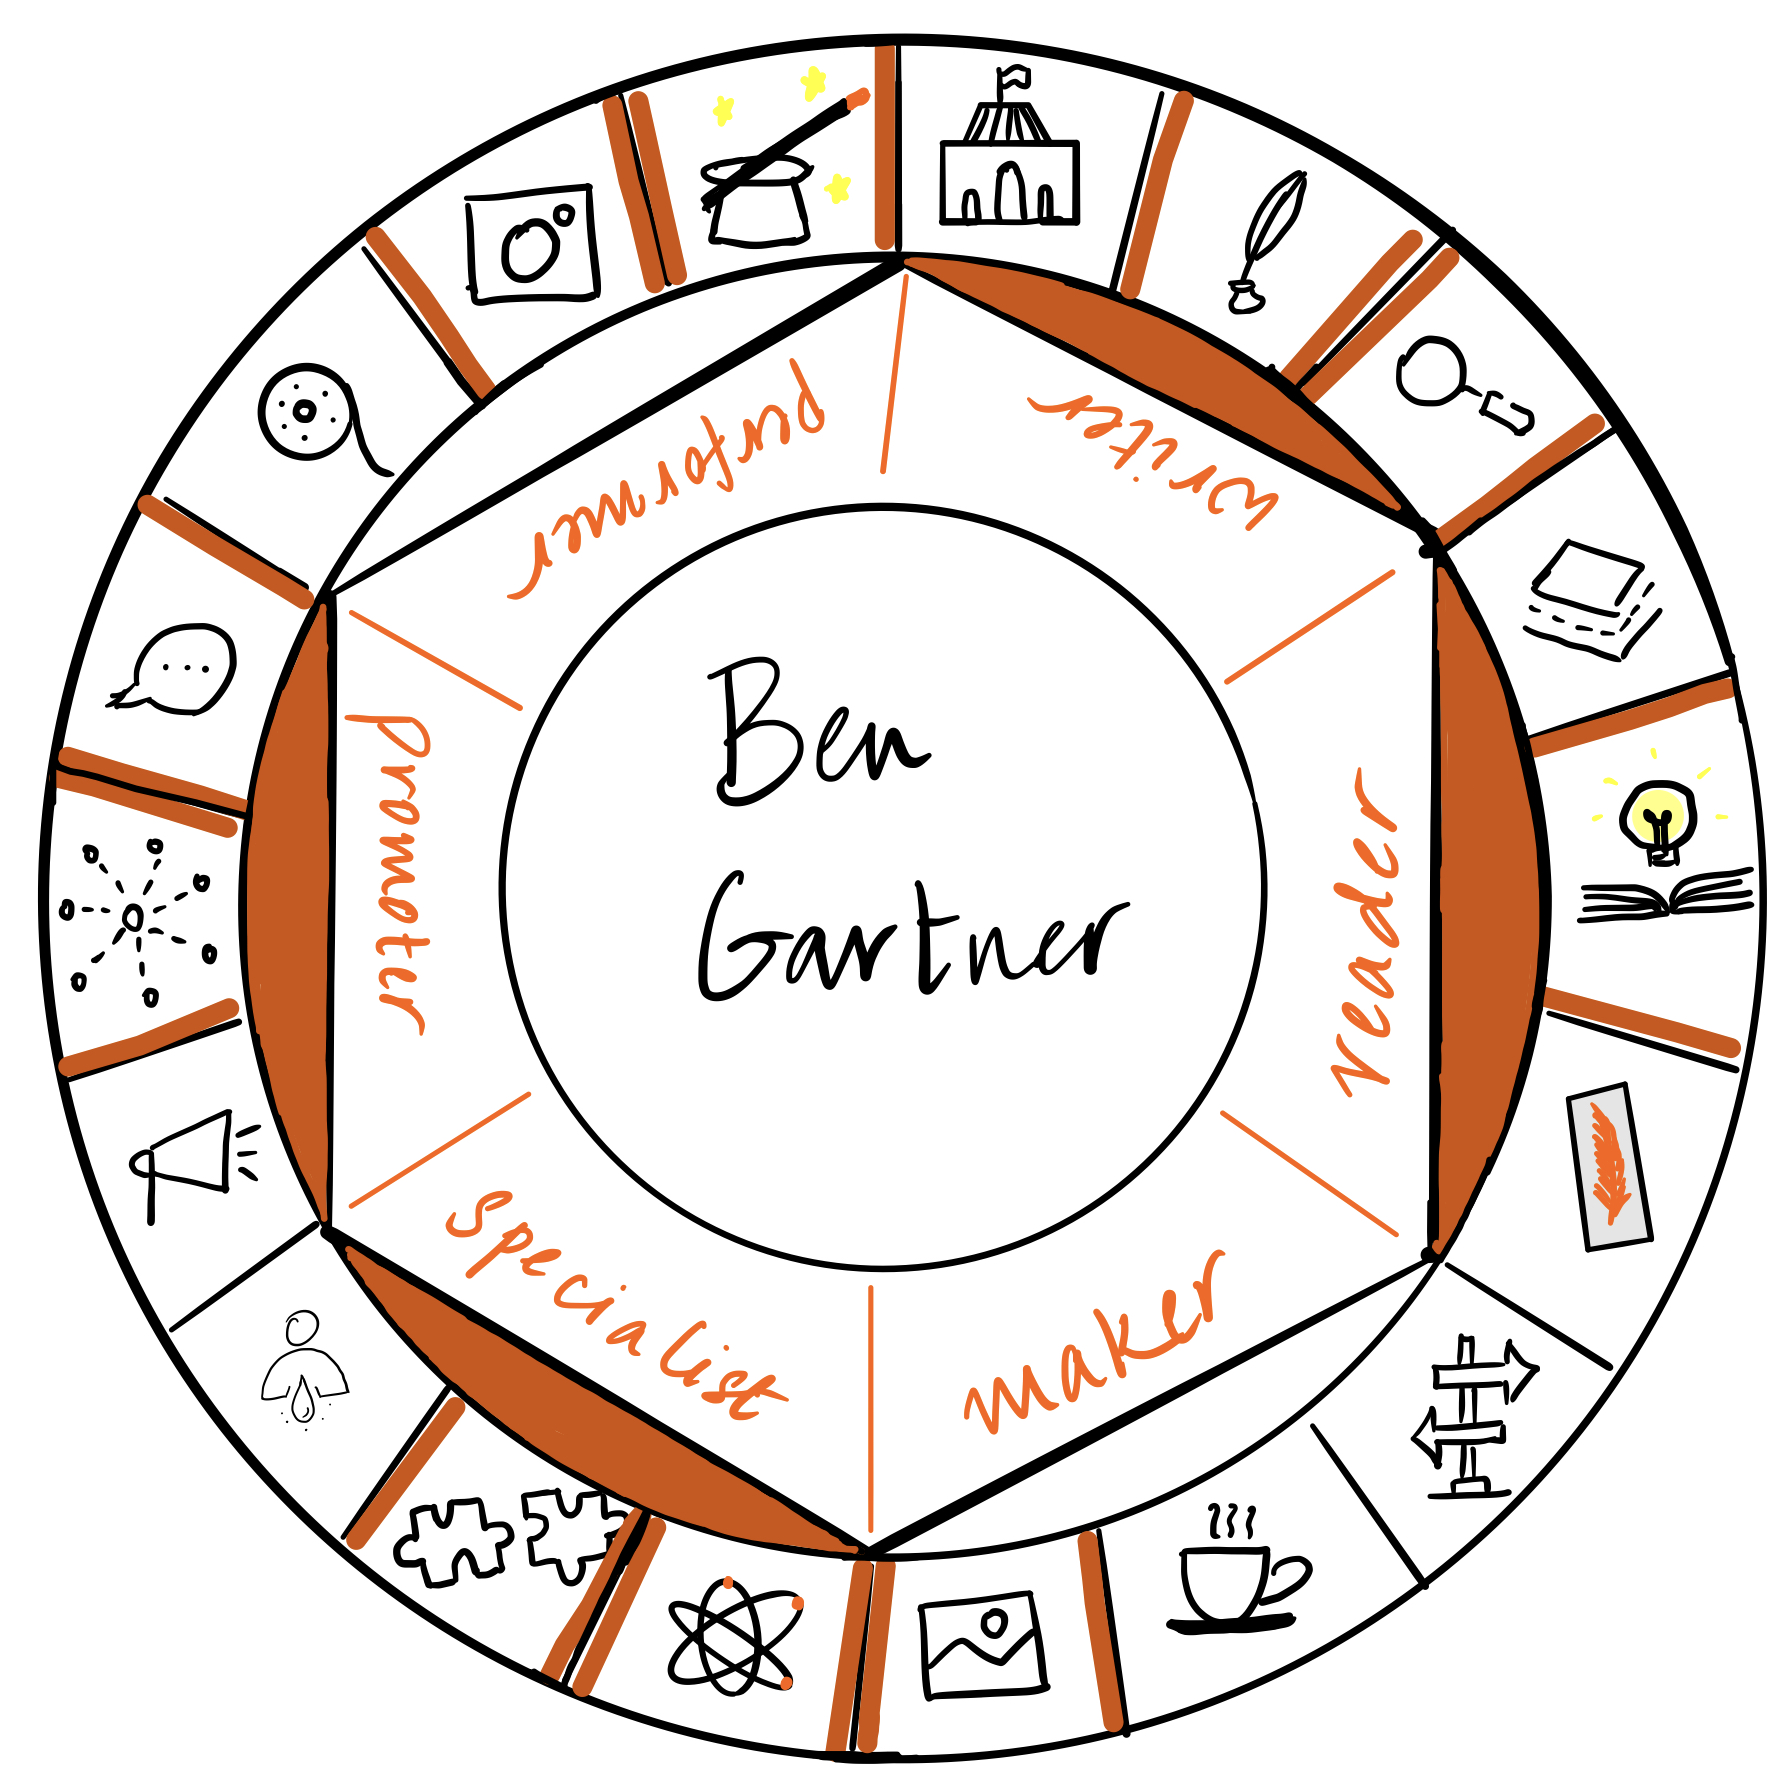 Ben Gartner is a writer, reader, promoter and specialist. It's a pleasure to have him over on The Creator's Roulette to talk about reading and cultivating a love for reading.